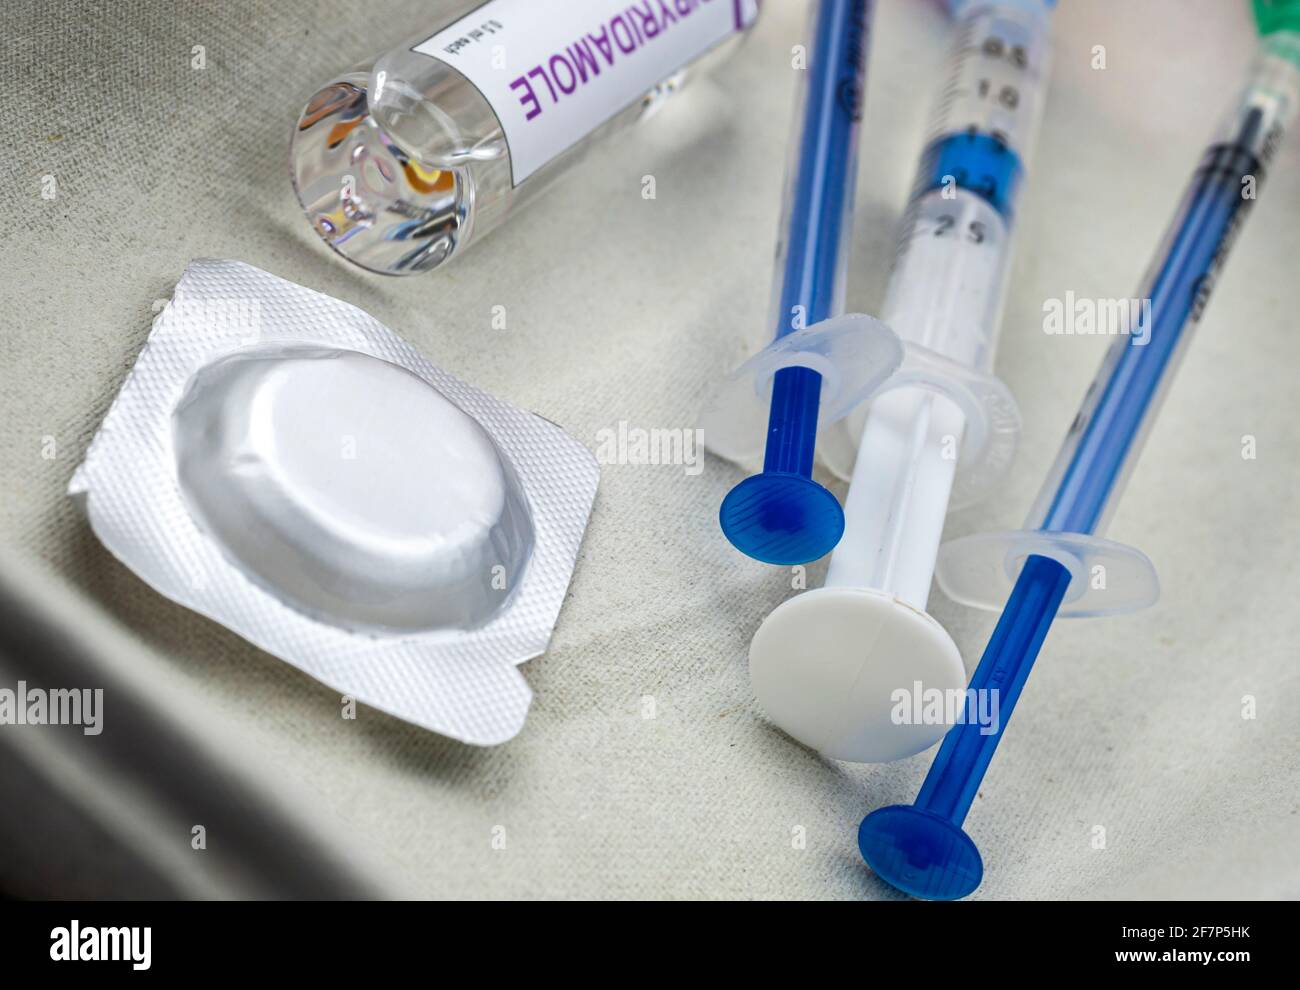 Syringes loaded with medication next to medicine vials prepared in hospital, conceptual image Stock Photo